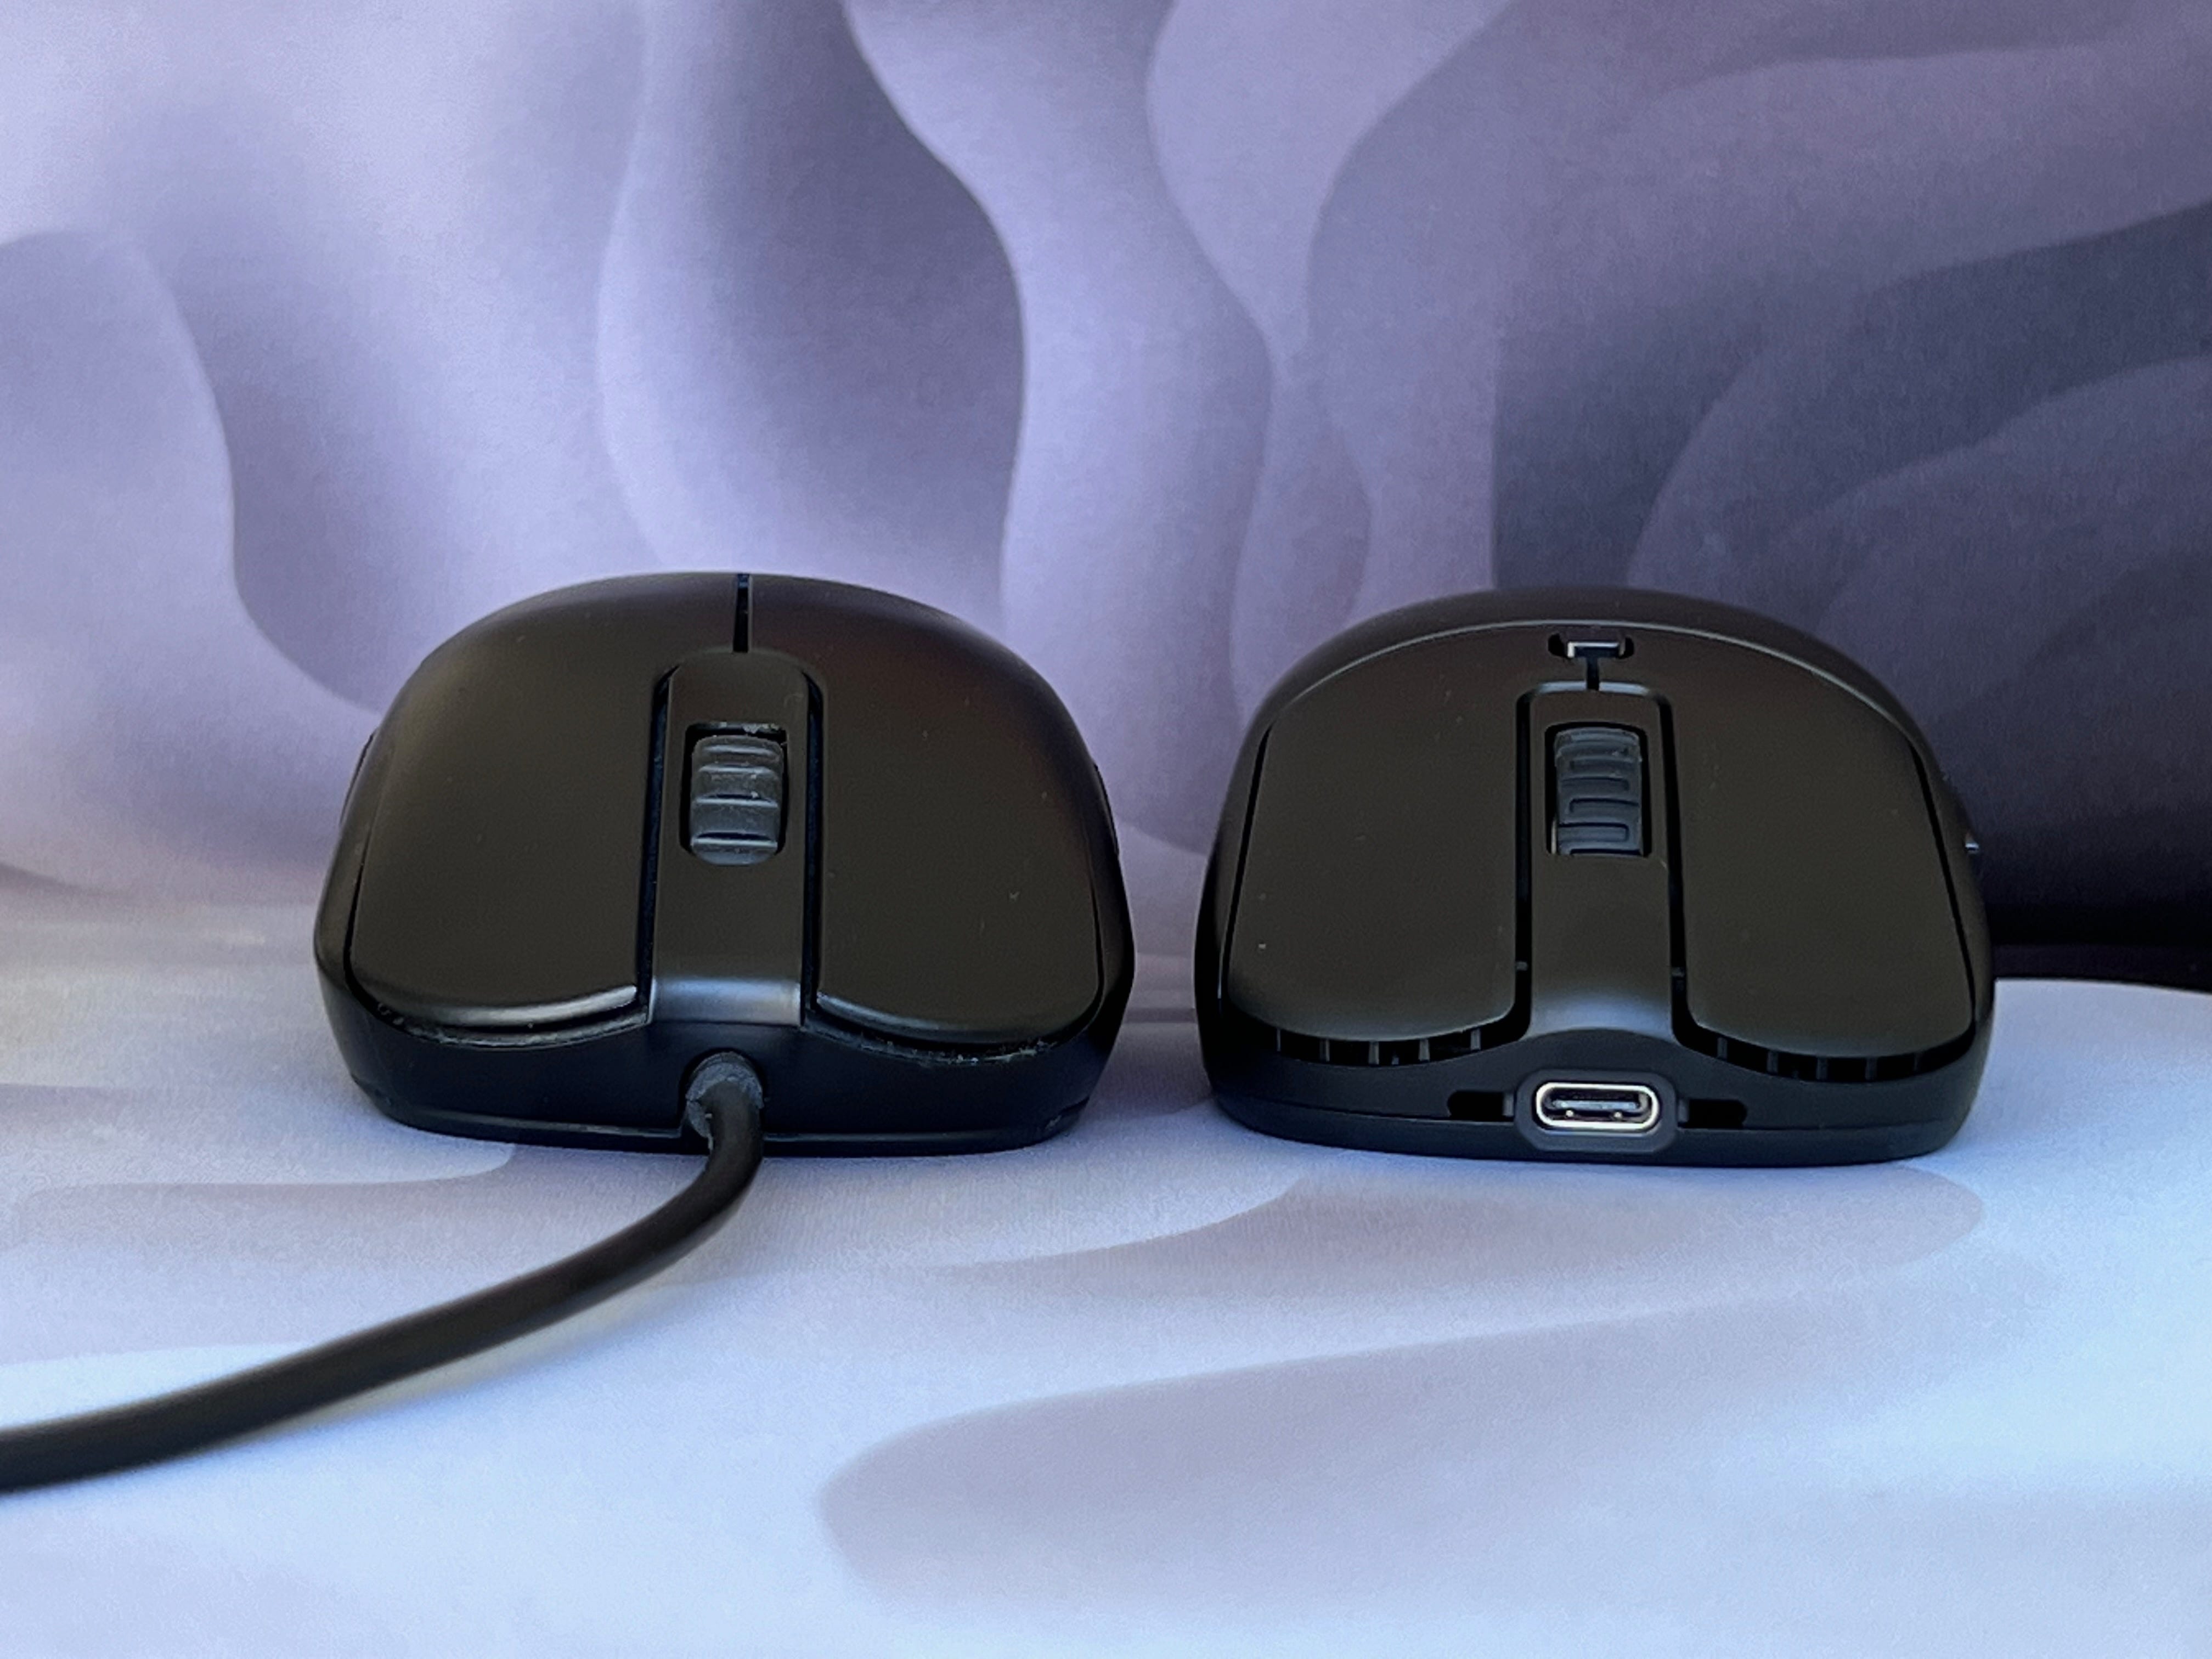 VAXEE XE Wireless Review: A Top-Notch Ambi | My Giant Wrinkle